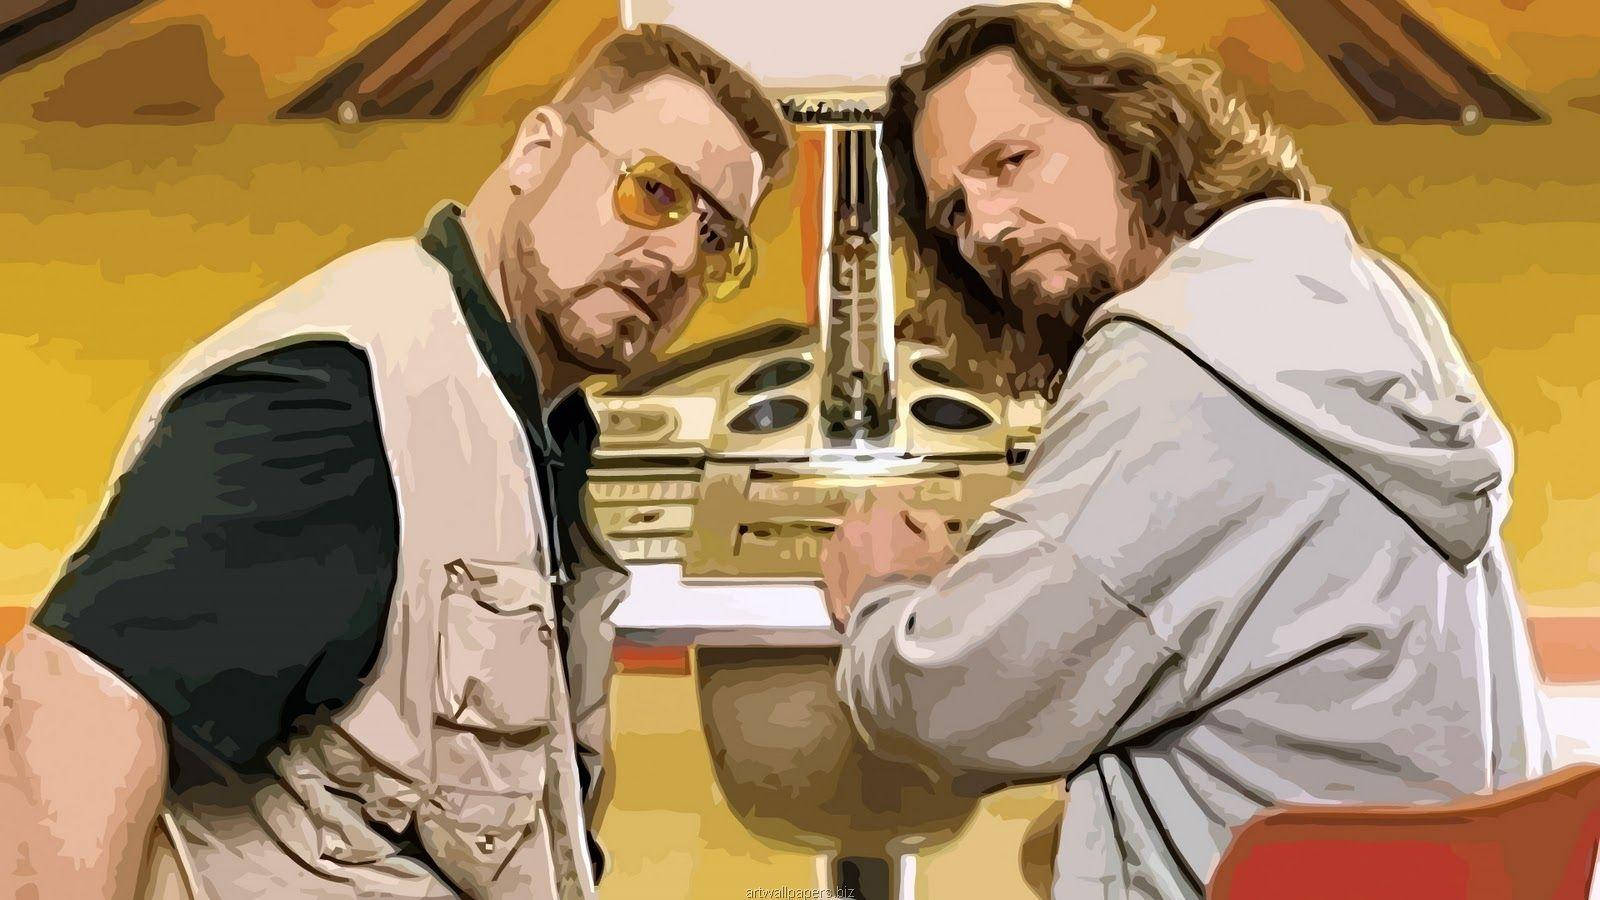 The compelling gaze of The Dude and Walter Sobchak from The Big Lebowski Wallpaper